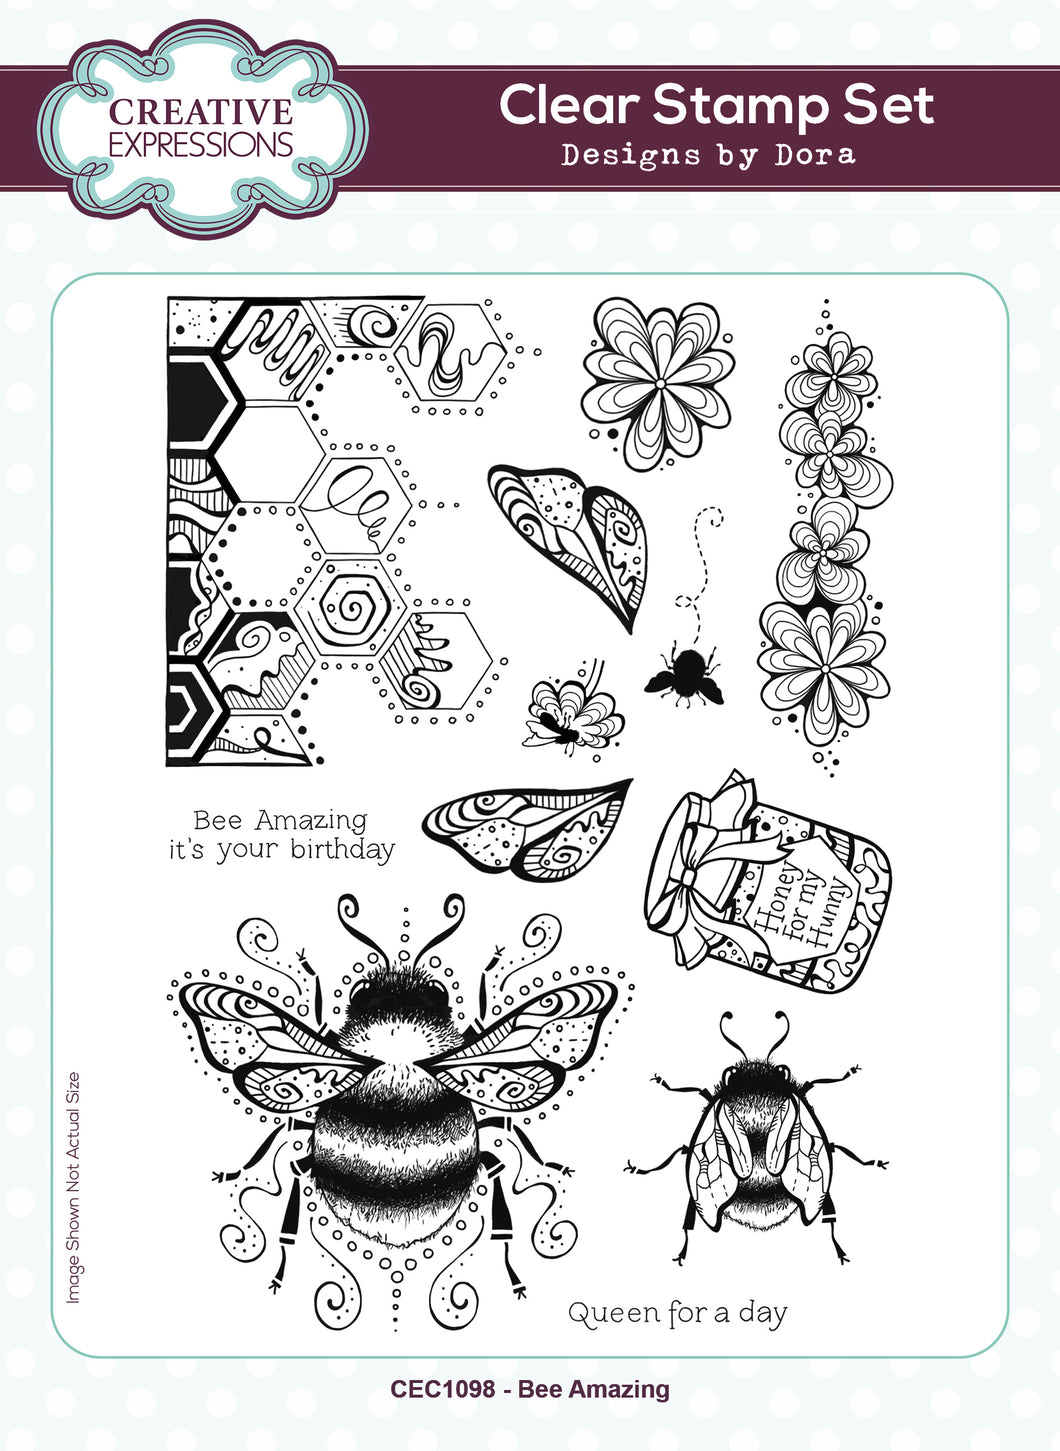 Creative Expressions Designs by Dora A5 Clear Stamp Set - Bee Amazing